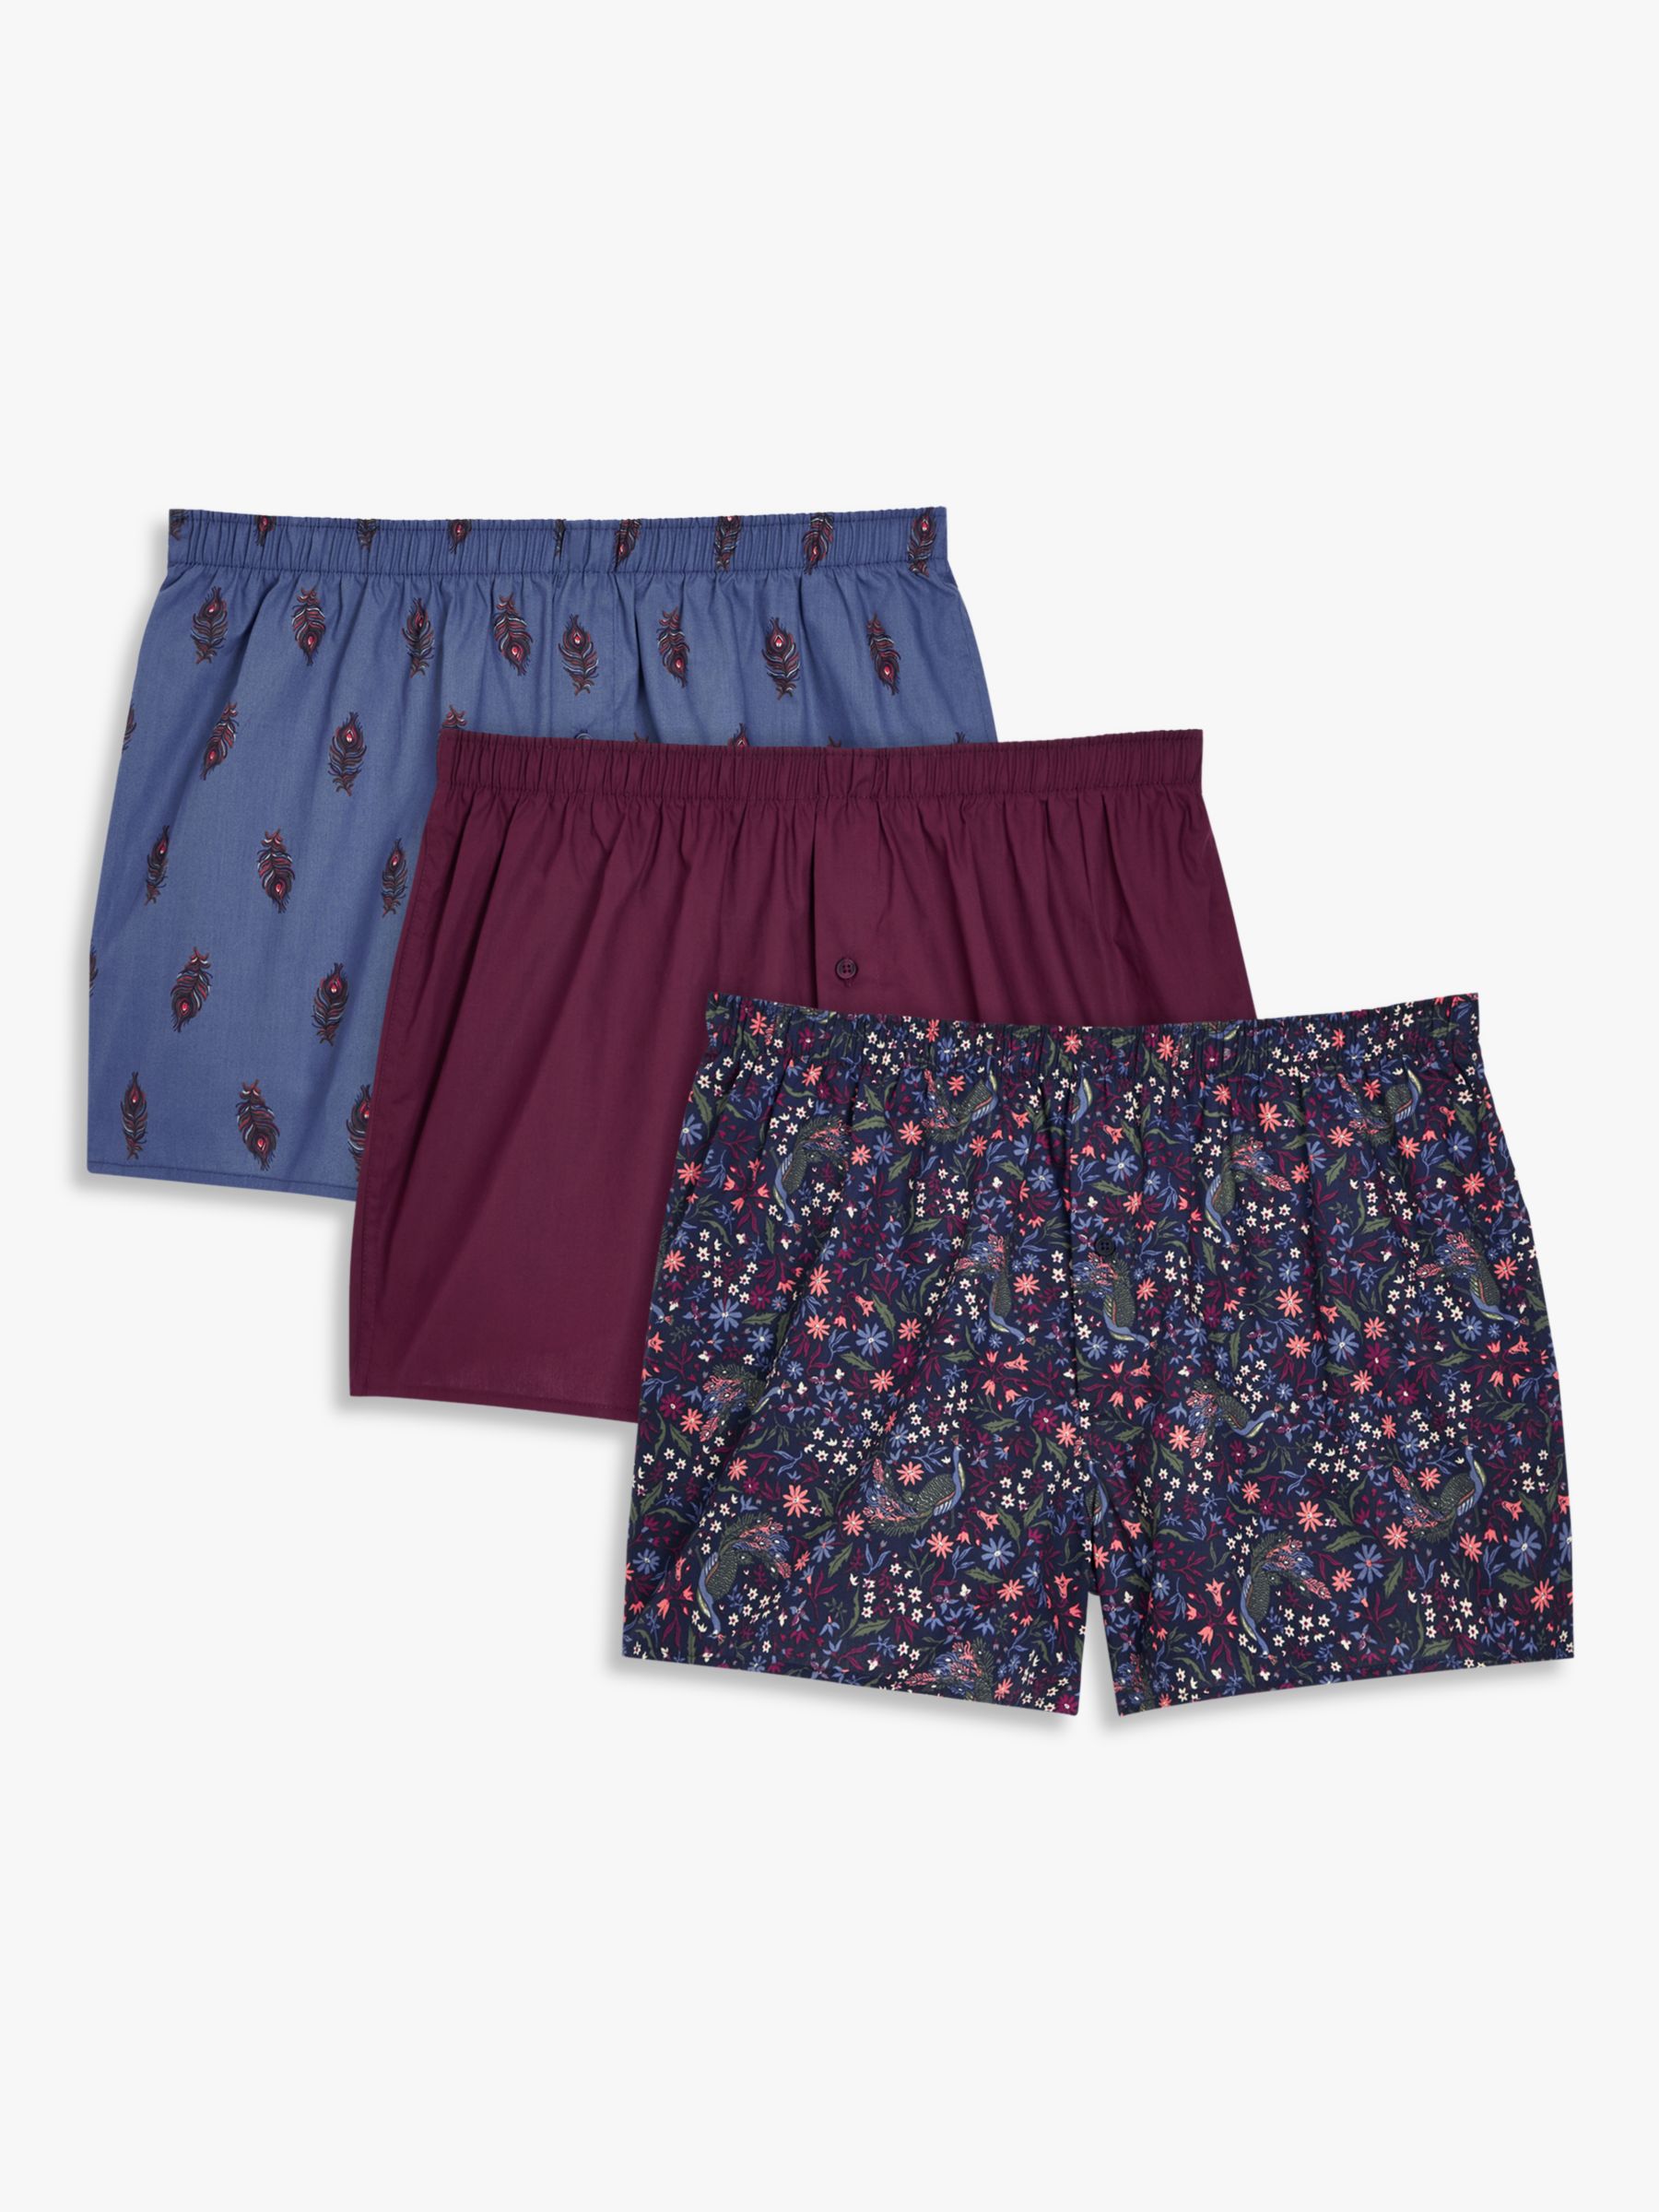 PRINTED WOVEN BOXERS, 3-PACK